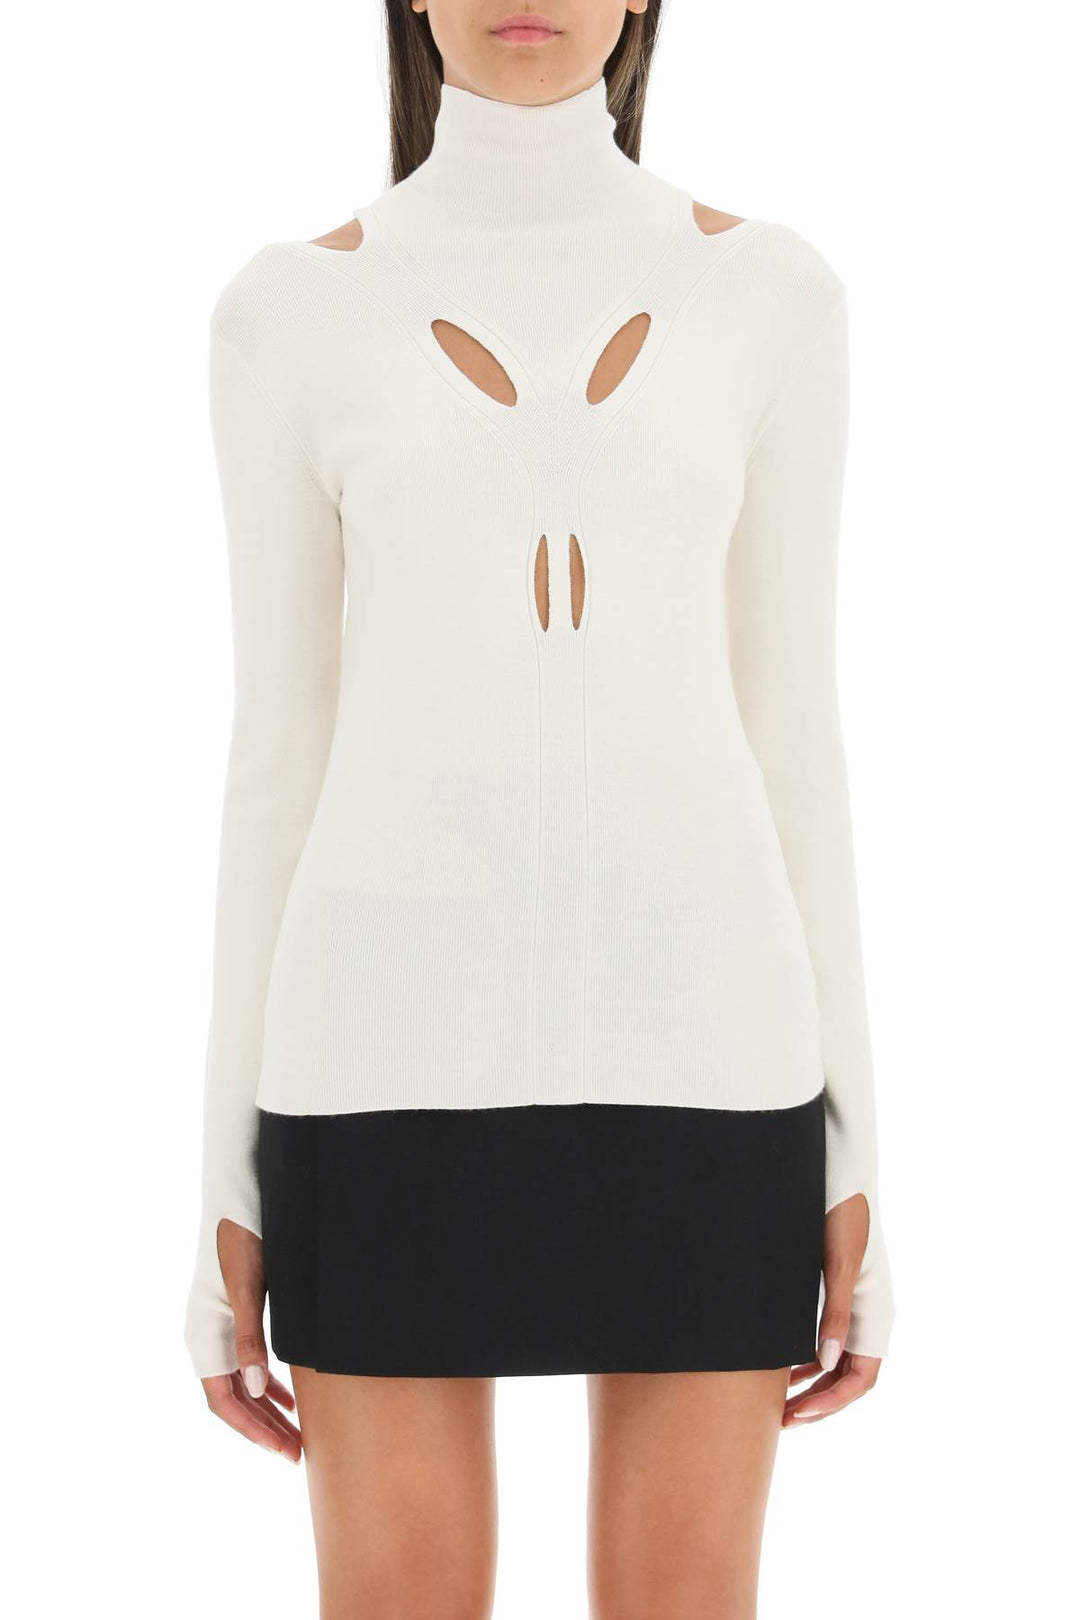 Dion lee cut-out skivvy-1